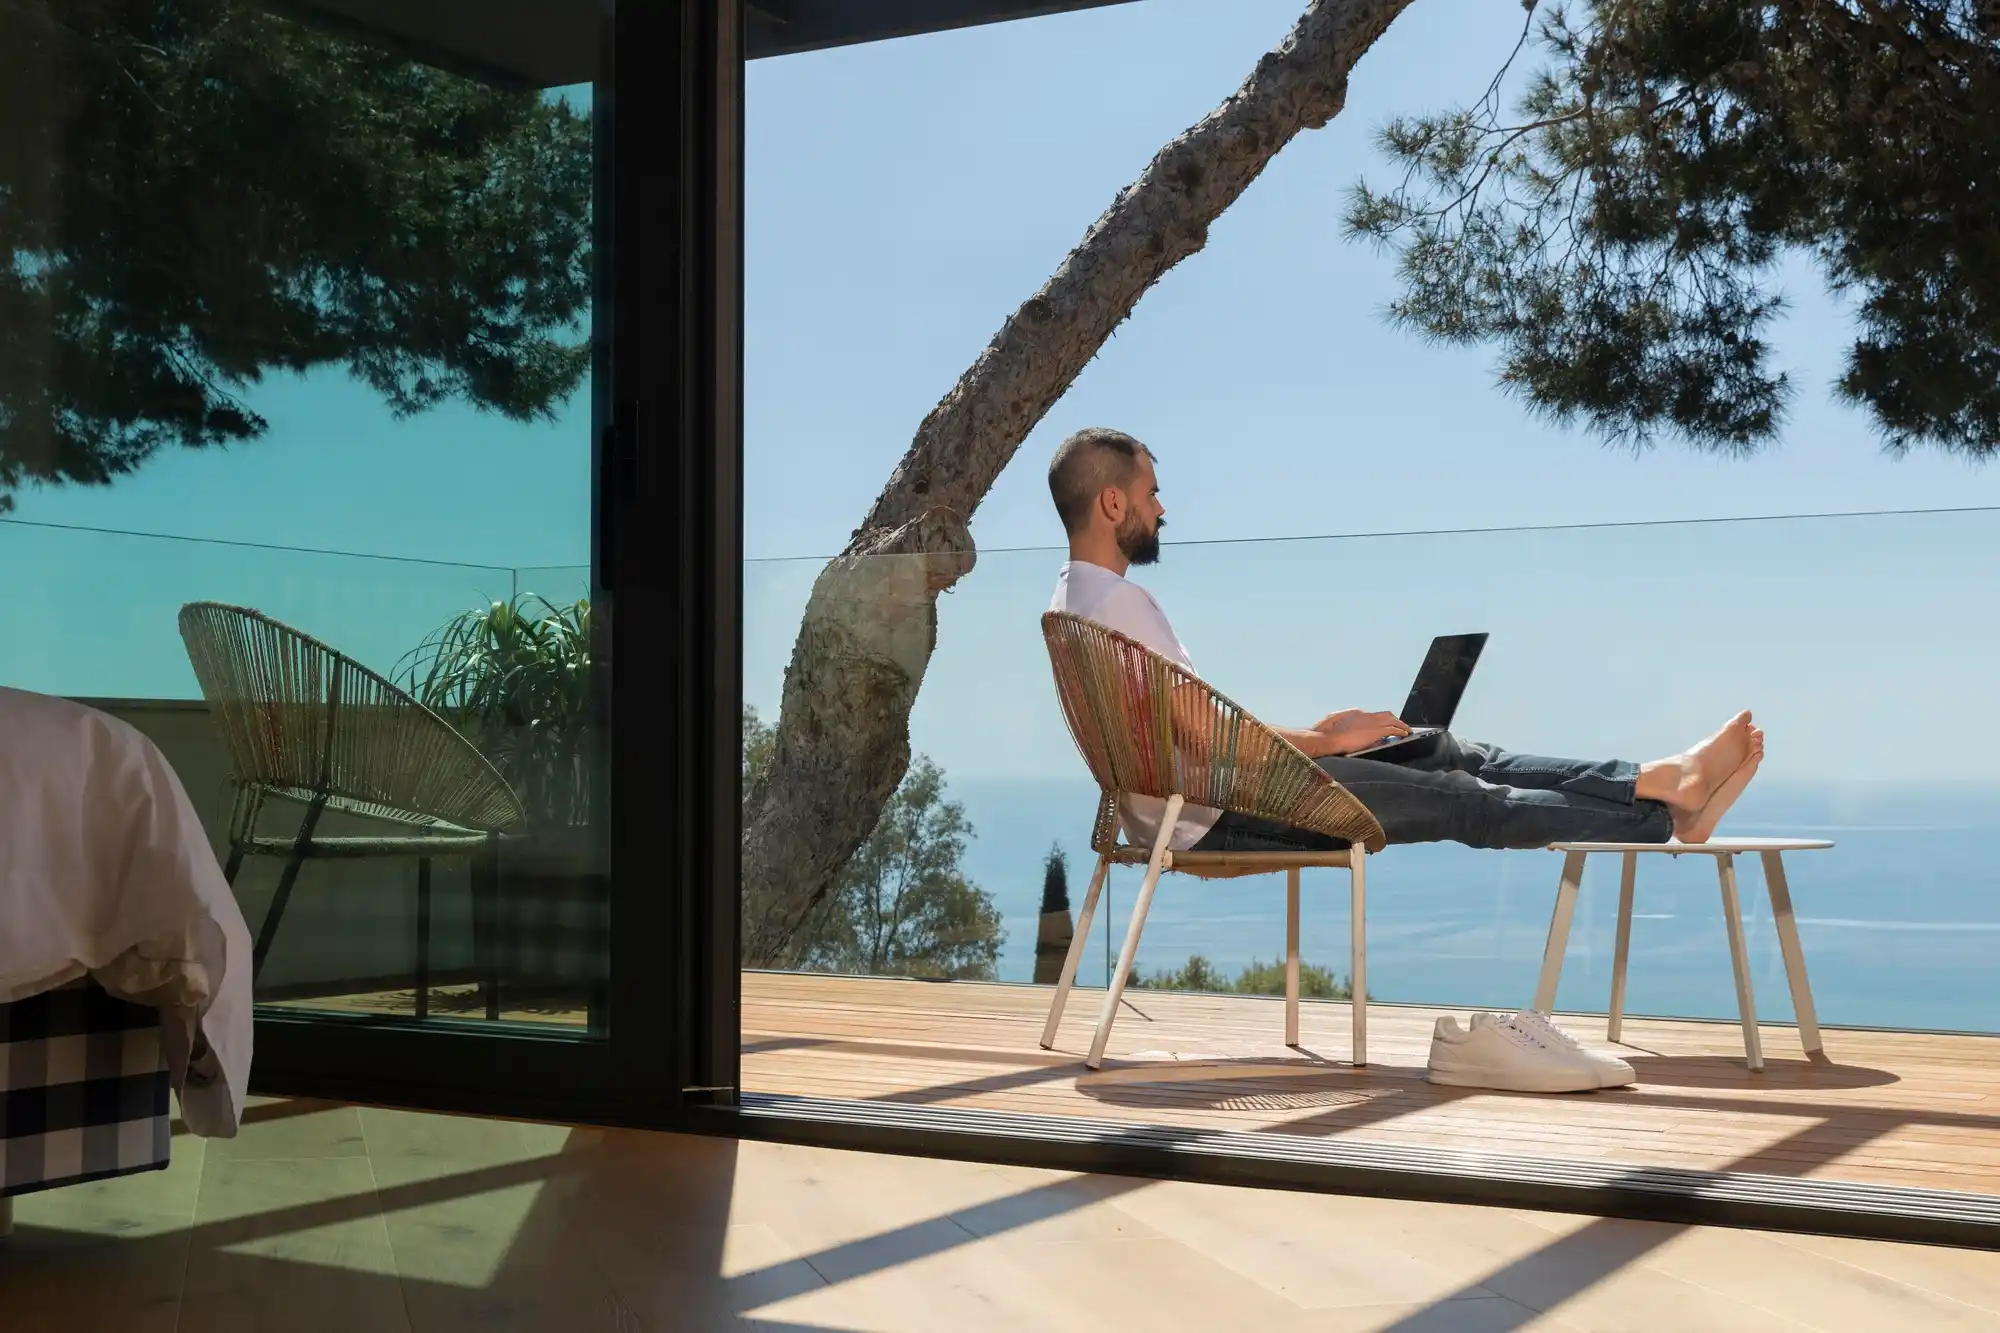 The Future of Work: Remote Work Revolution or a Recipe for Isolation?